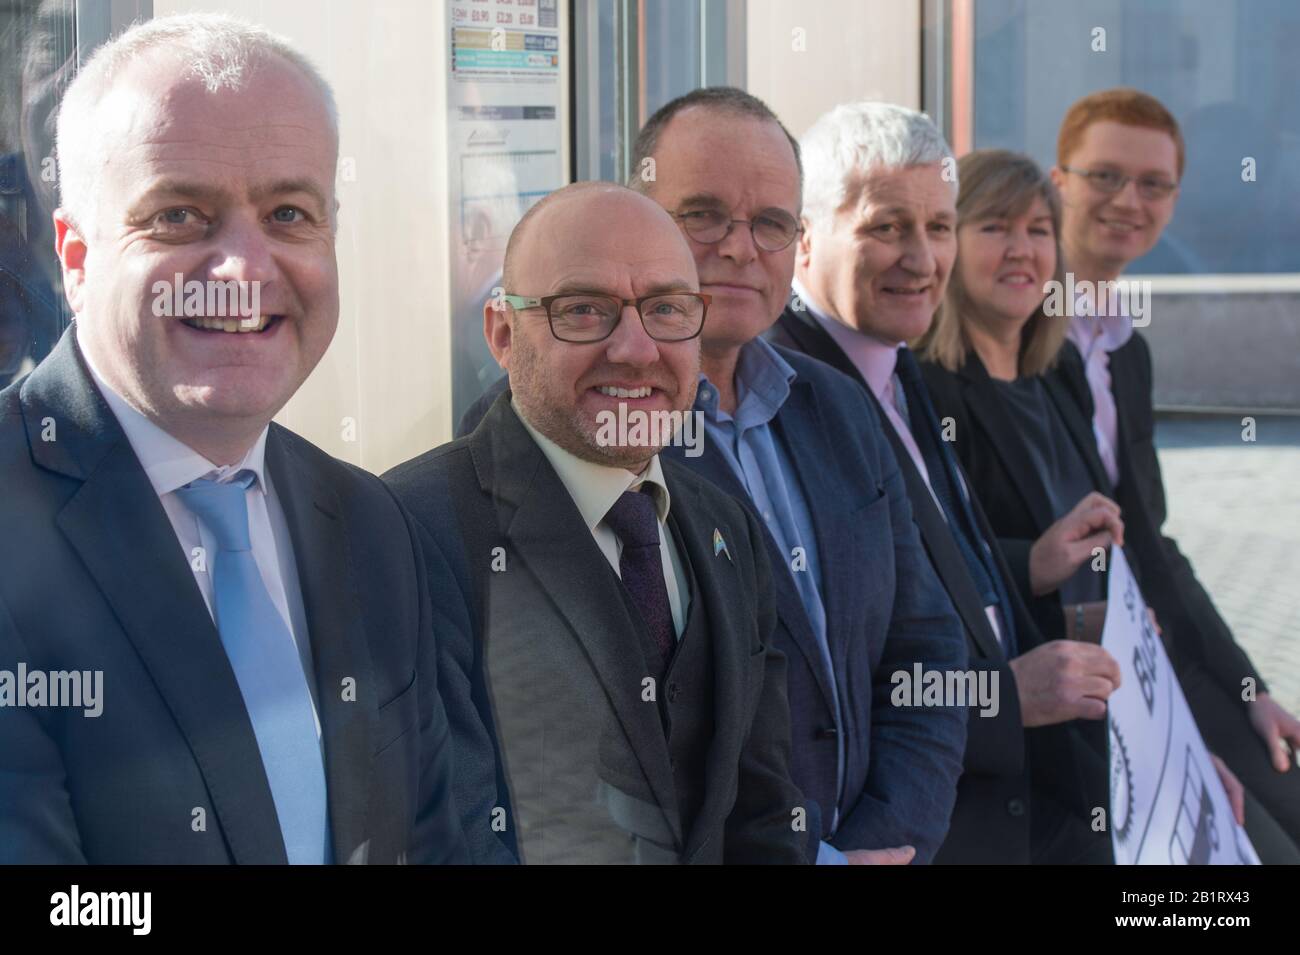 Edinburgh, UK. 27 February 2020. Pictured: L-R) Mark Ruskell MSP; Patrick Harvie MSP; Andy Wightman MSP; John Finnie MSP; Alison Johnstone MSP; Ross Greer MSP. Ahead of the budget debate this afternoon Scottish Greens Parliamentary Co-Leaders Alison Johnstone MSP and Patrick Harvie MSP along with the Green MSP group will stage a photocall outside the Scottish Parliament to celebrate their free bus travel for under 19s budget win. The Scottish Greens yesterday announced that a deal had been struck on free bus travel, more money for councils, extra resource for community safety and an additi Stock Photo